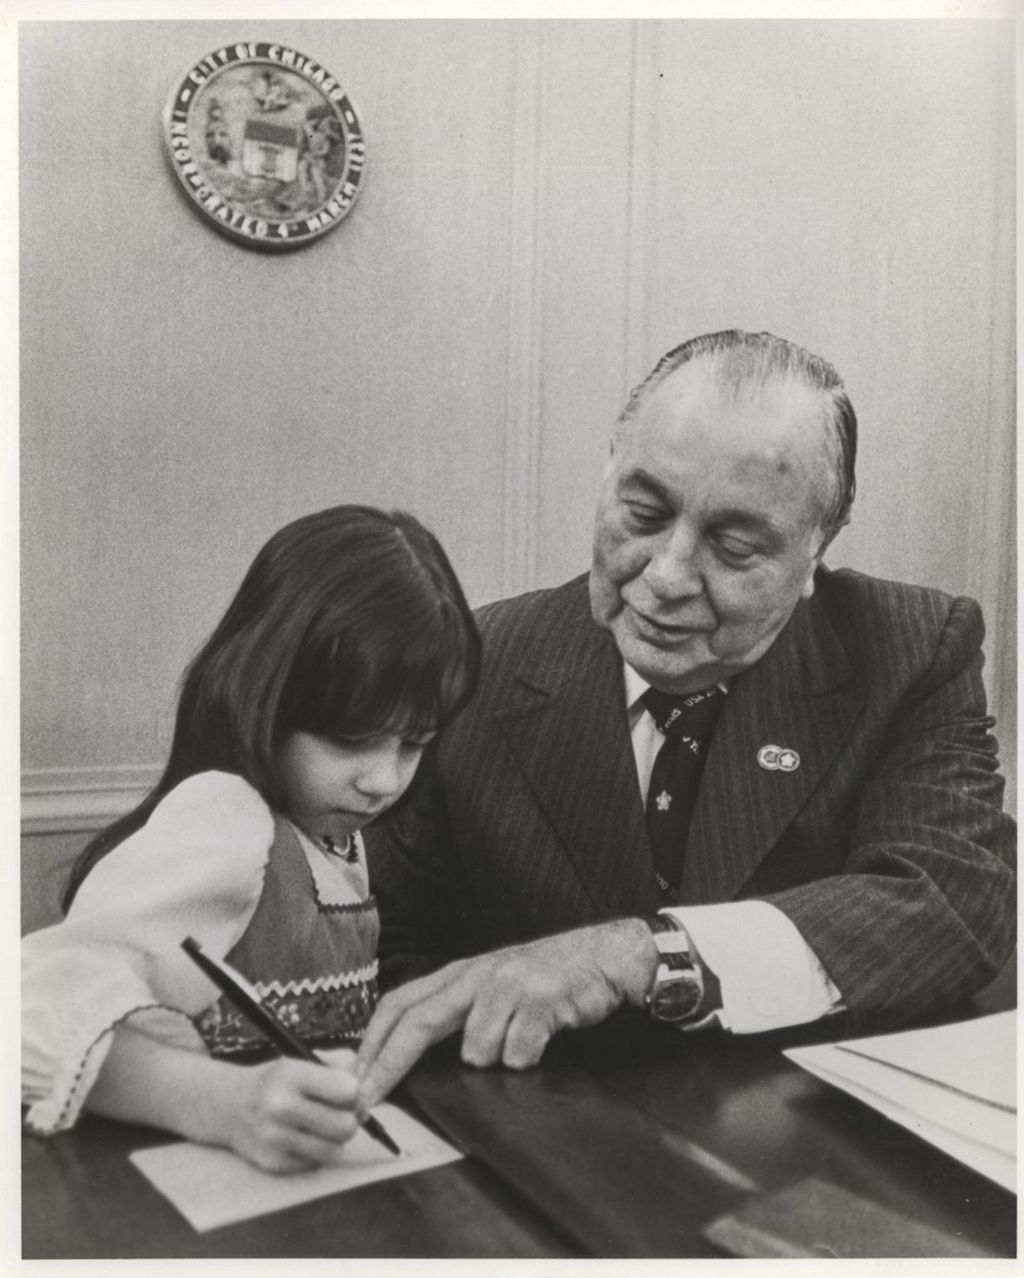 Miniature of Richard J. Daley helping a young girl writing